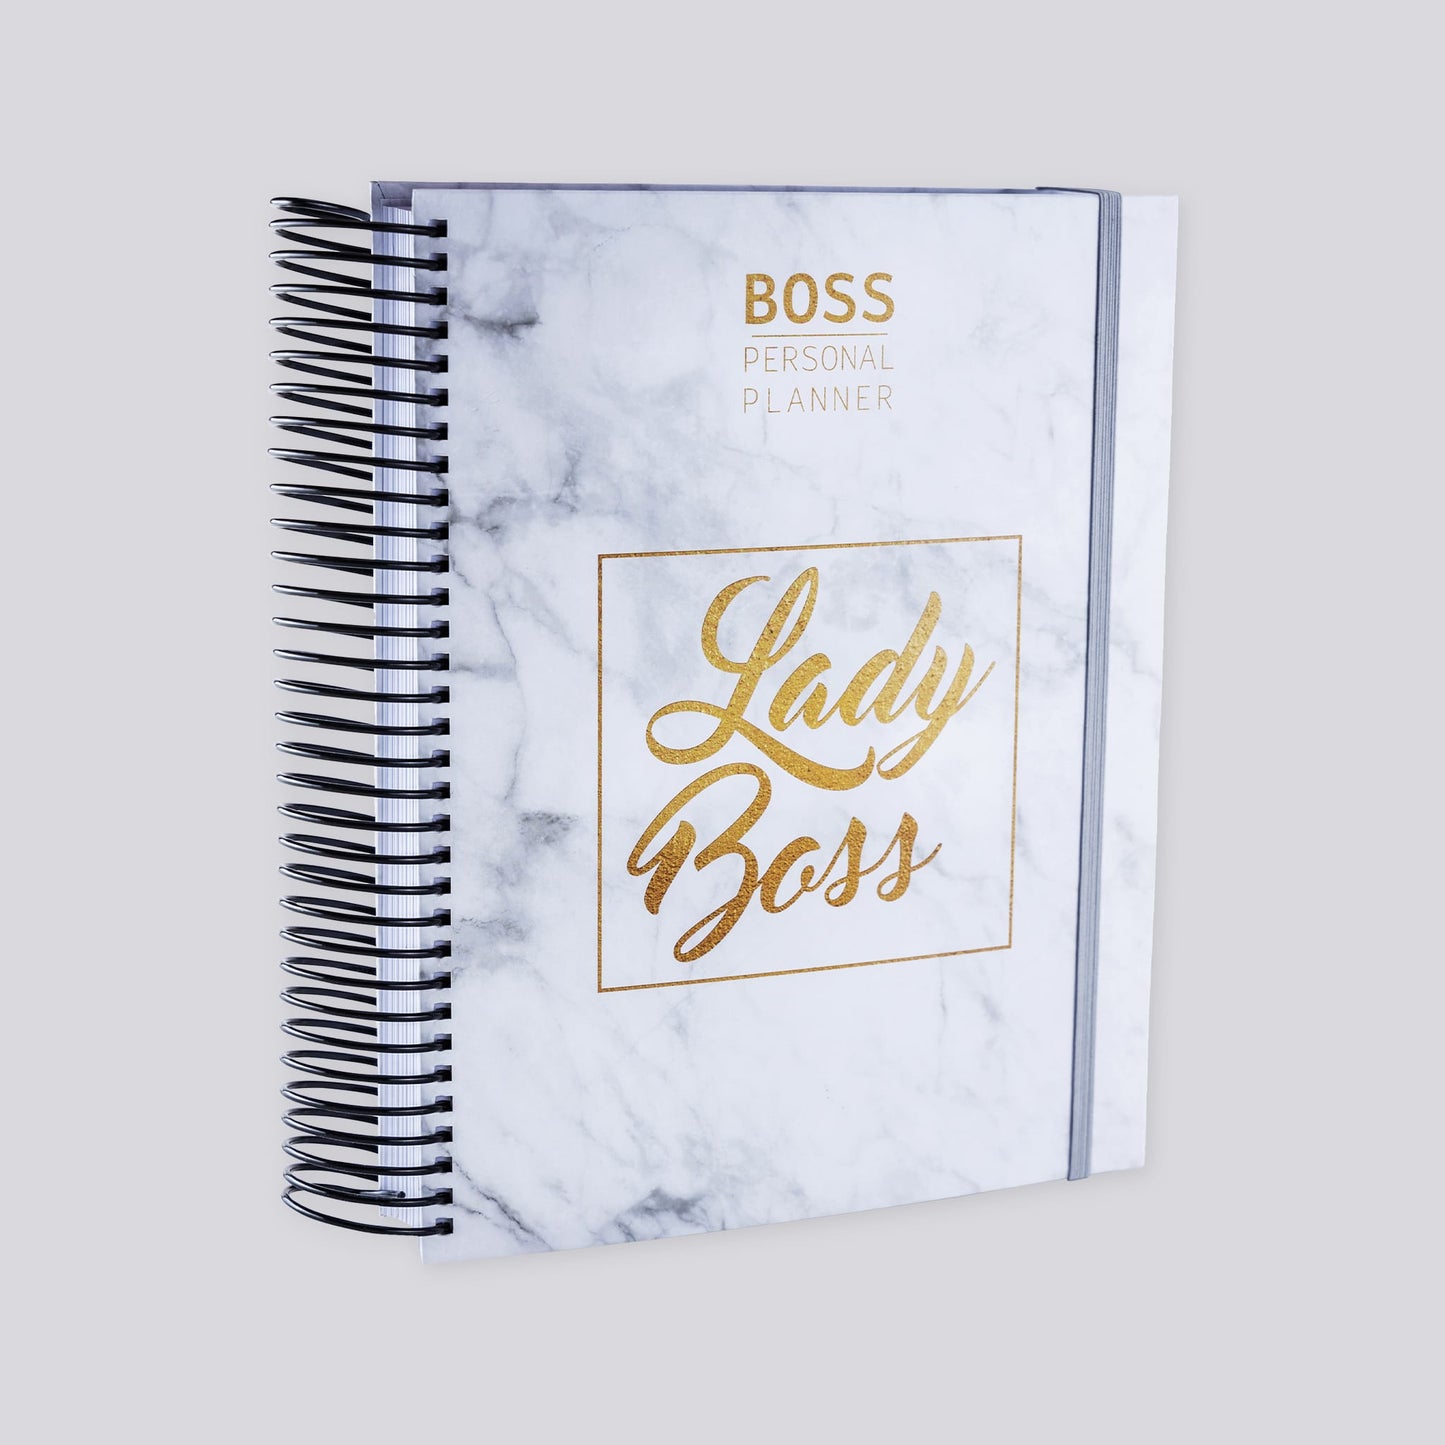 ultimate planner lady boss cover